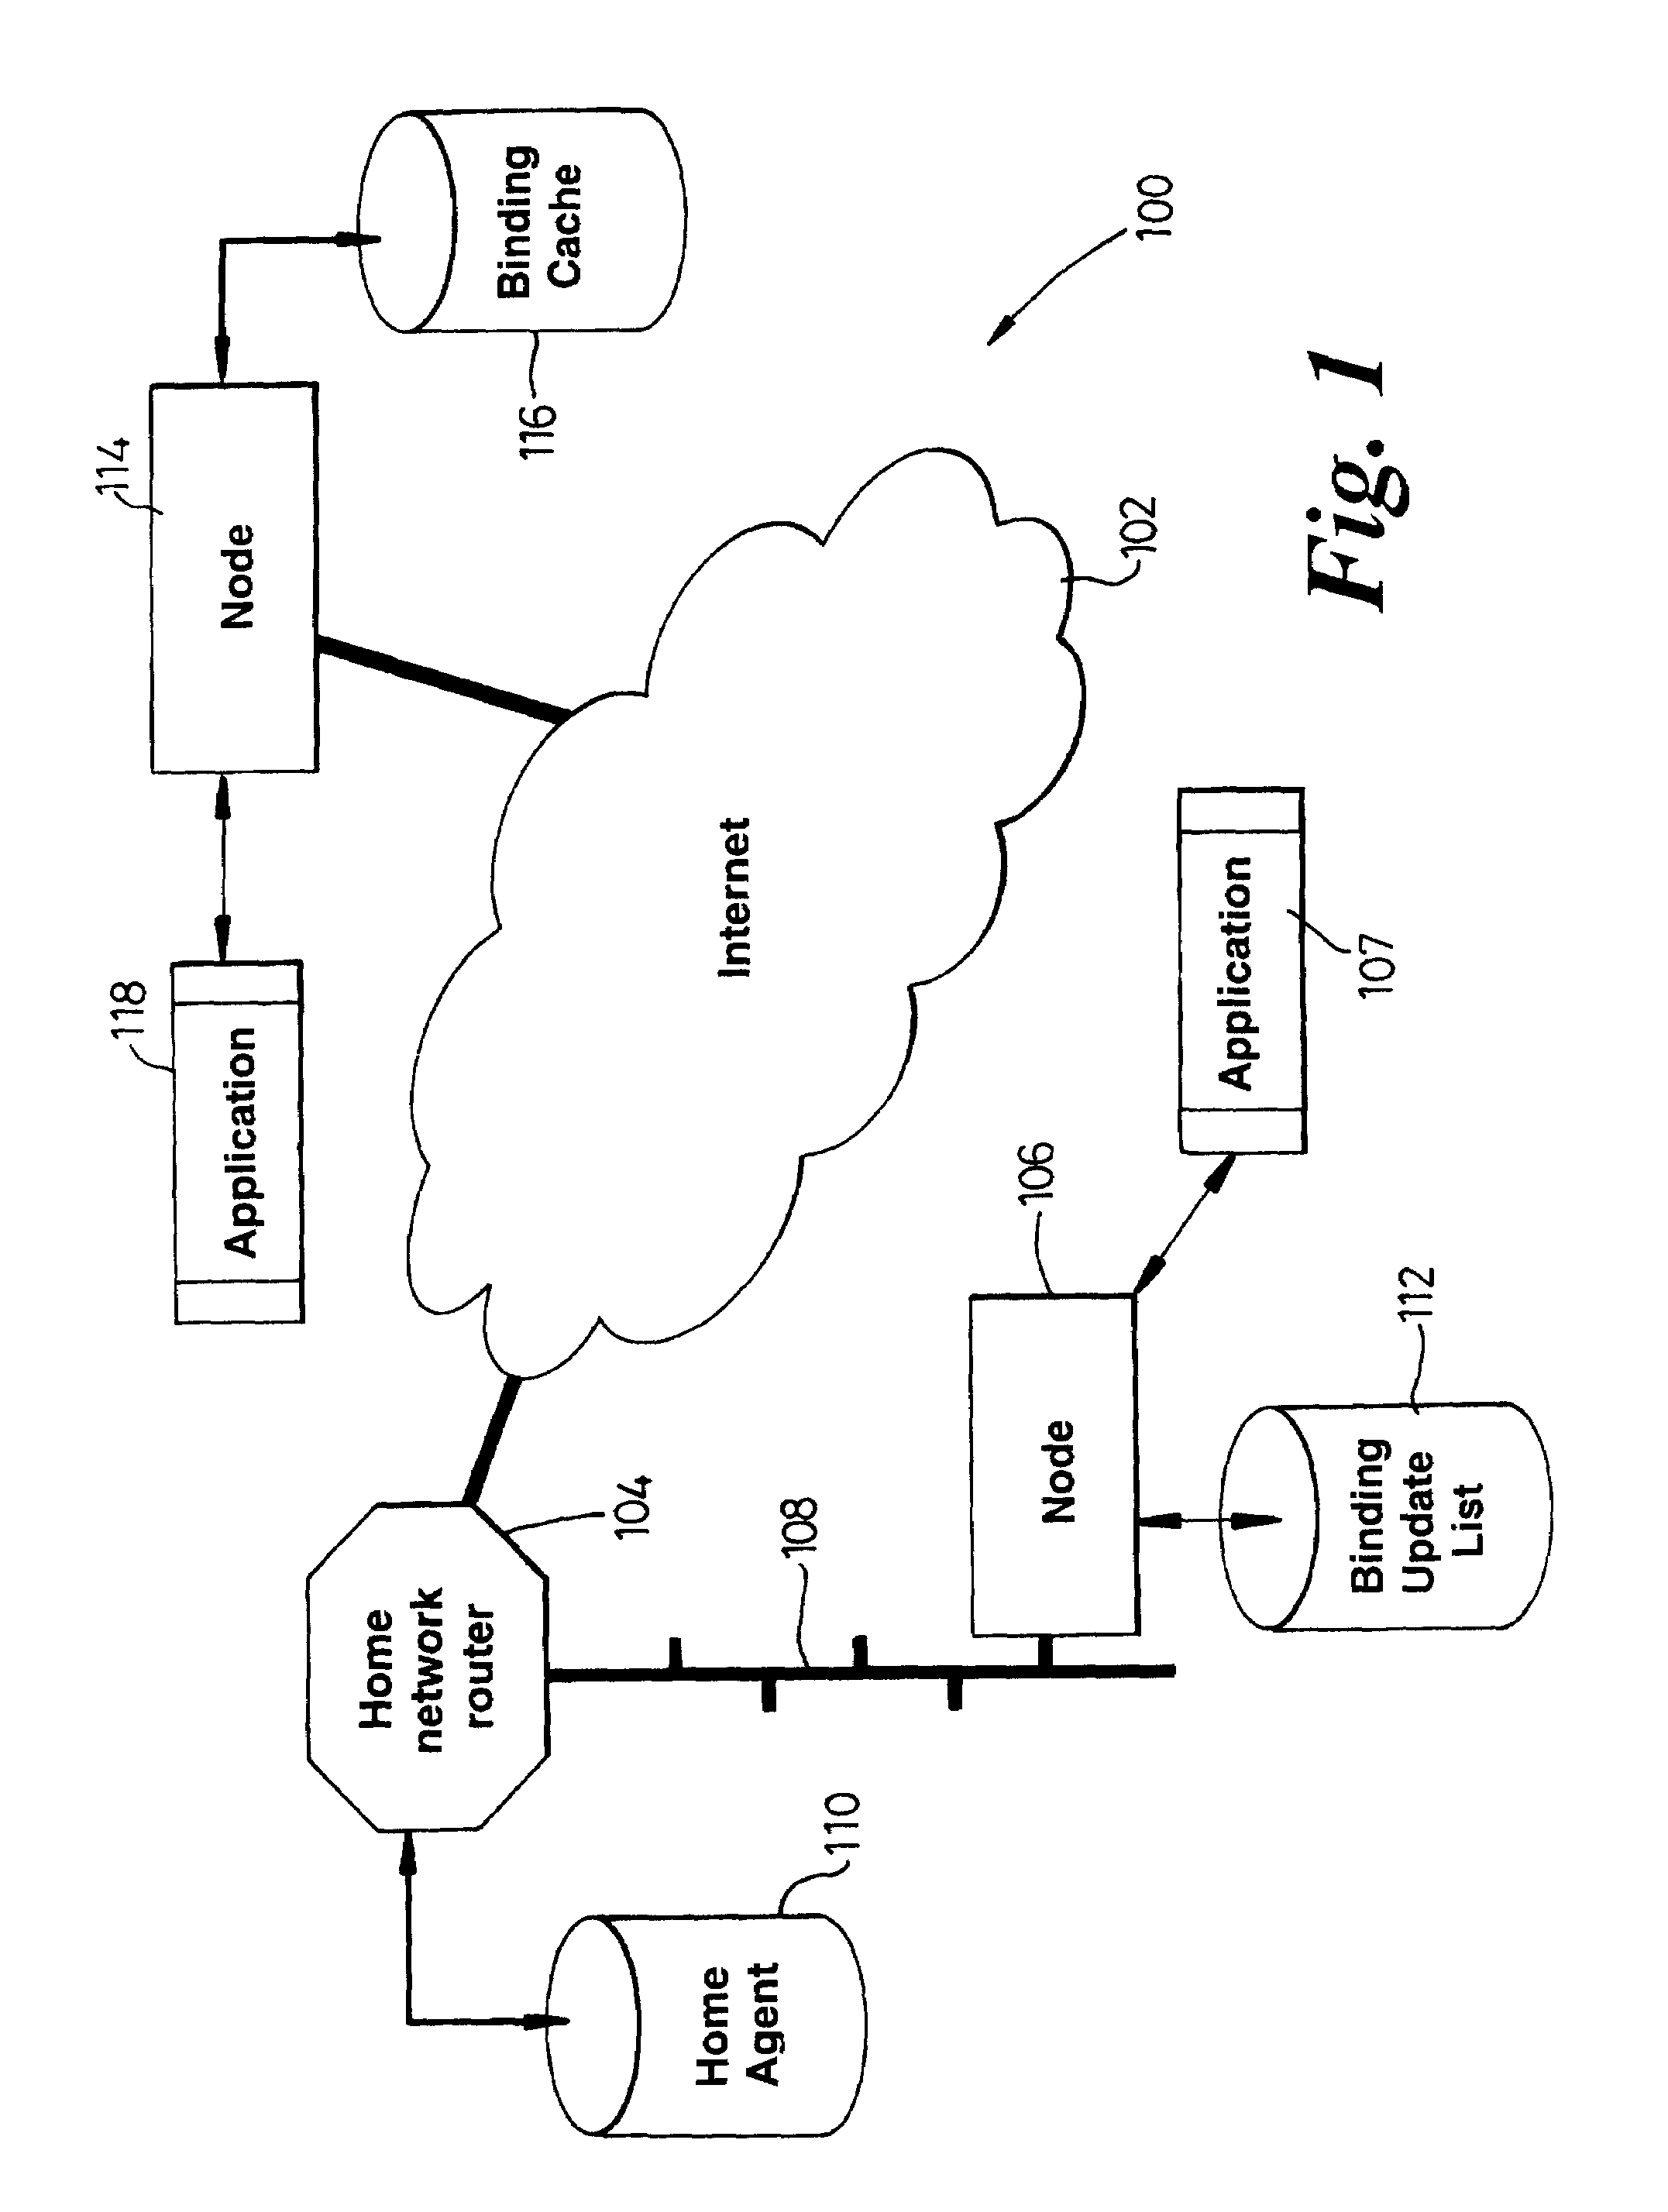 Communications system, apparatus and method therefor